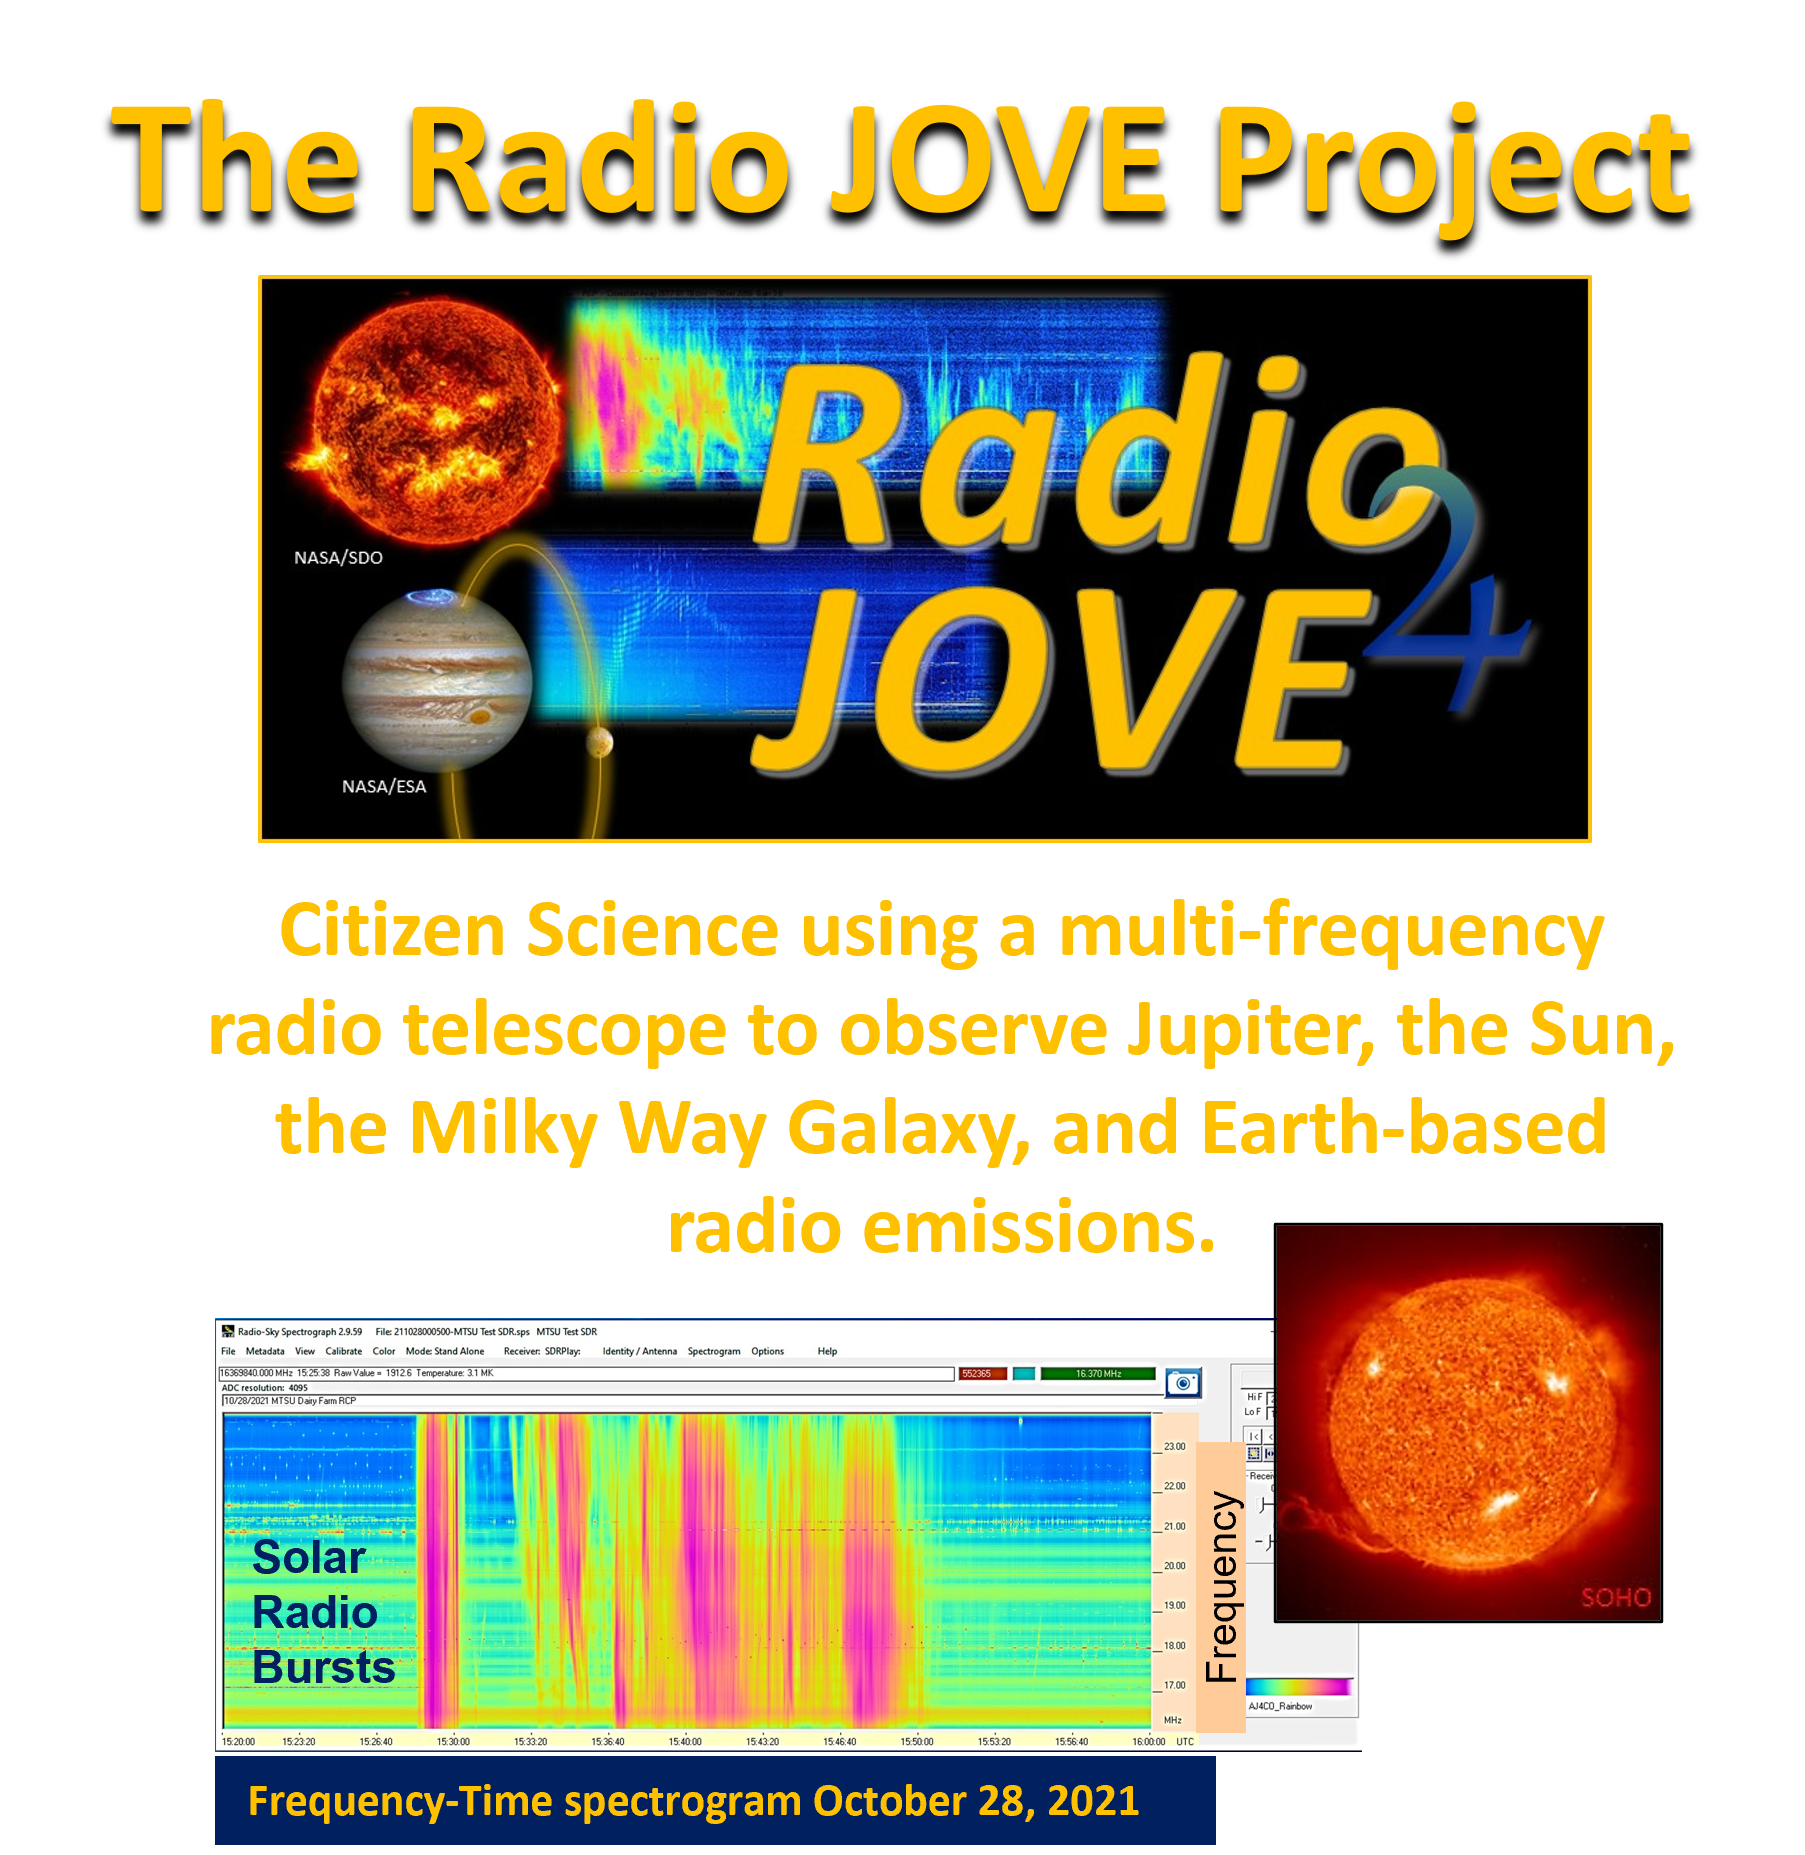 A collage of colorful spectrogram images showing solar radio bursts and images of the sun with solar flares and Jupiter. The title reads The Radio JOVE Project and Citizen Science using a multi-frequency radio telescope to observe Jupiter, the Sun, the Milky Way Galaxy, and Earth-based radio emissions.